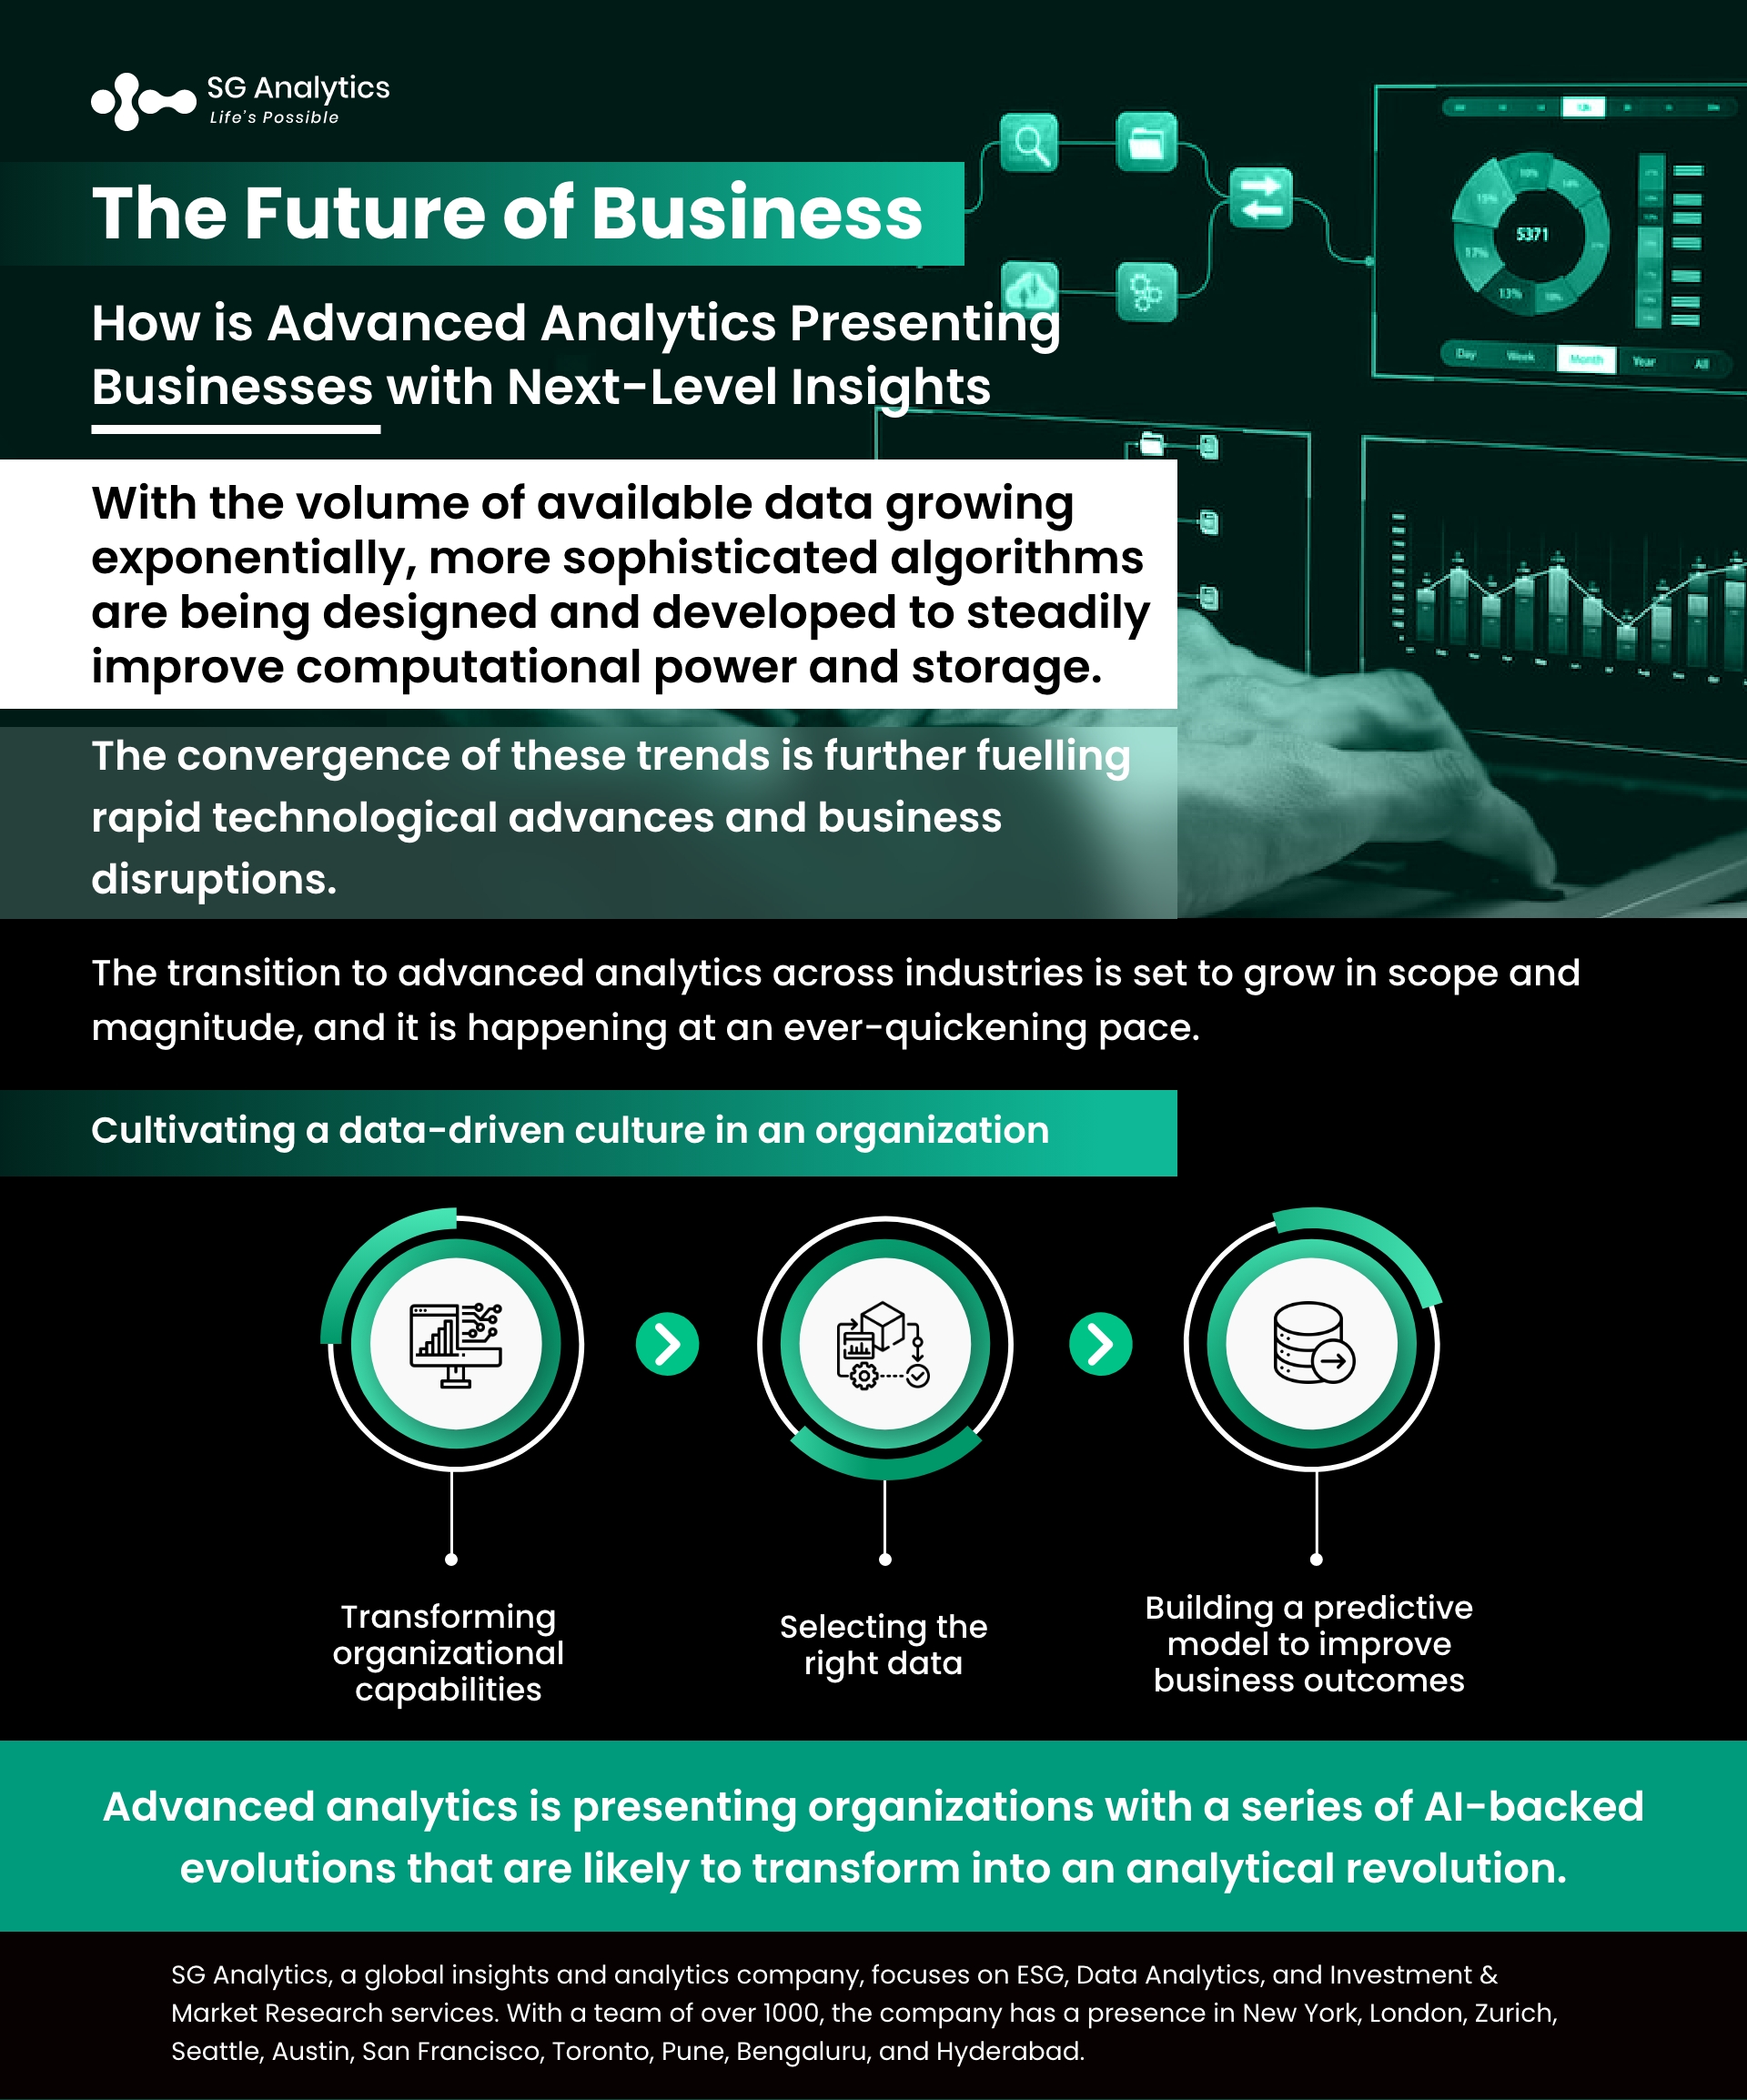 How is Advanced Analytics Presenting Businesses with Next-Level Insights